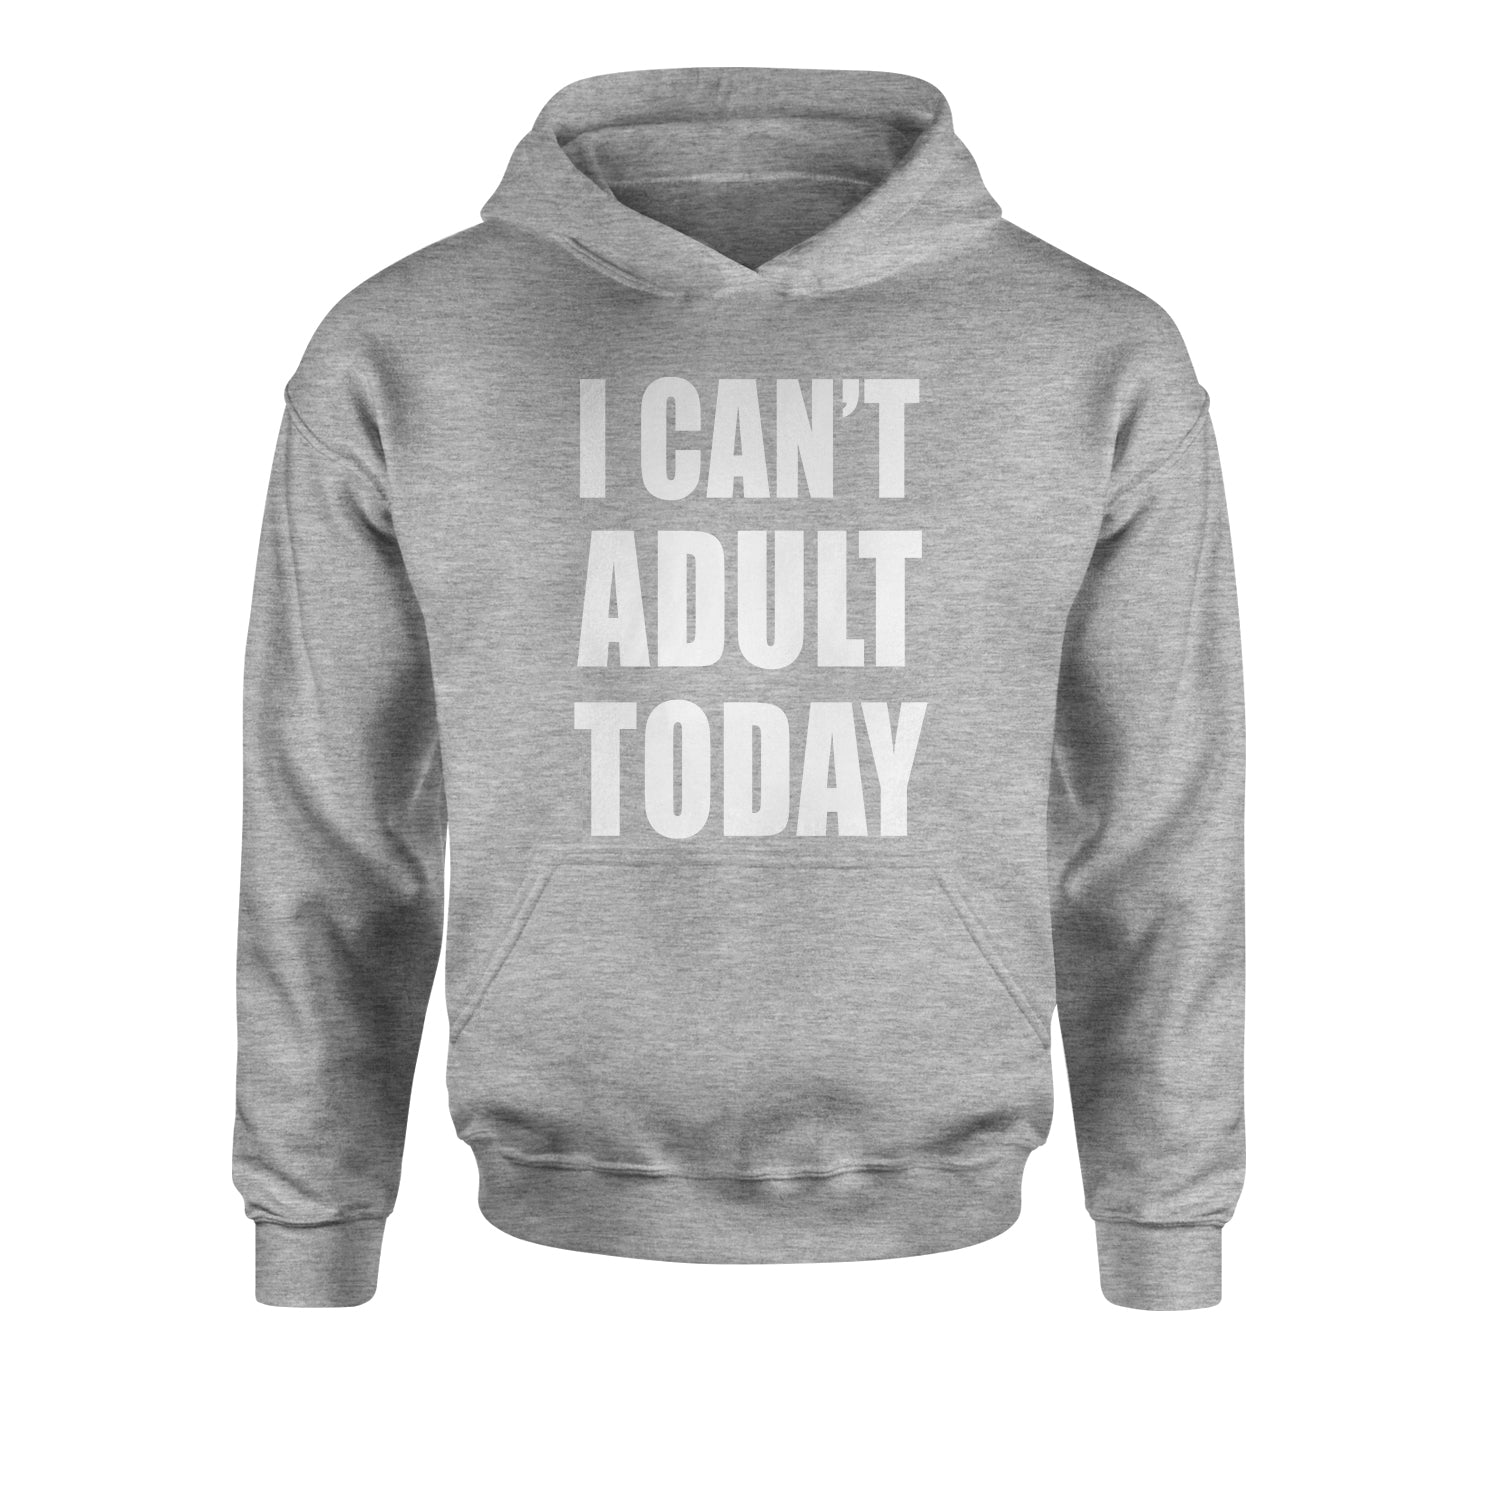 I Can't Adult Today Youth-Sized Hoodie adult, cant, I, today, youth-sized by Expression Tees